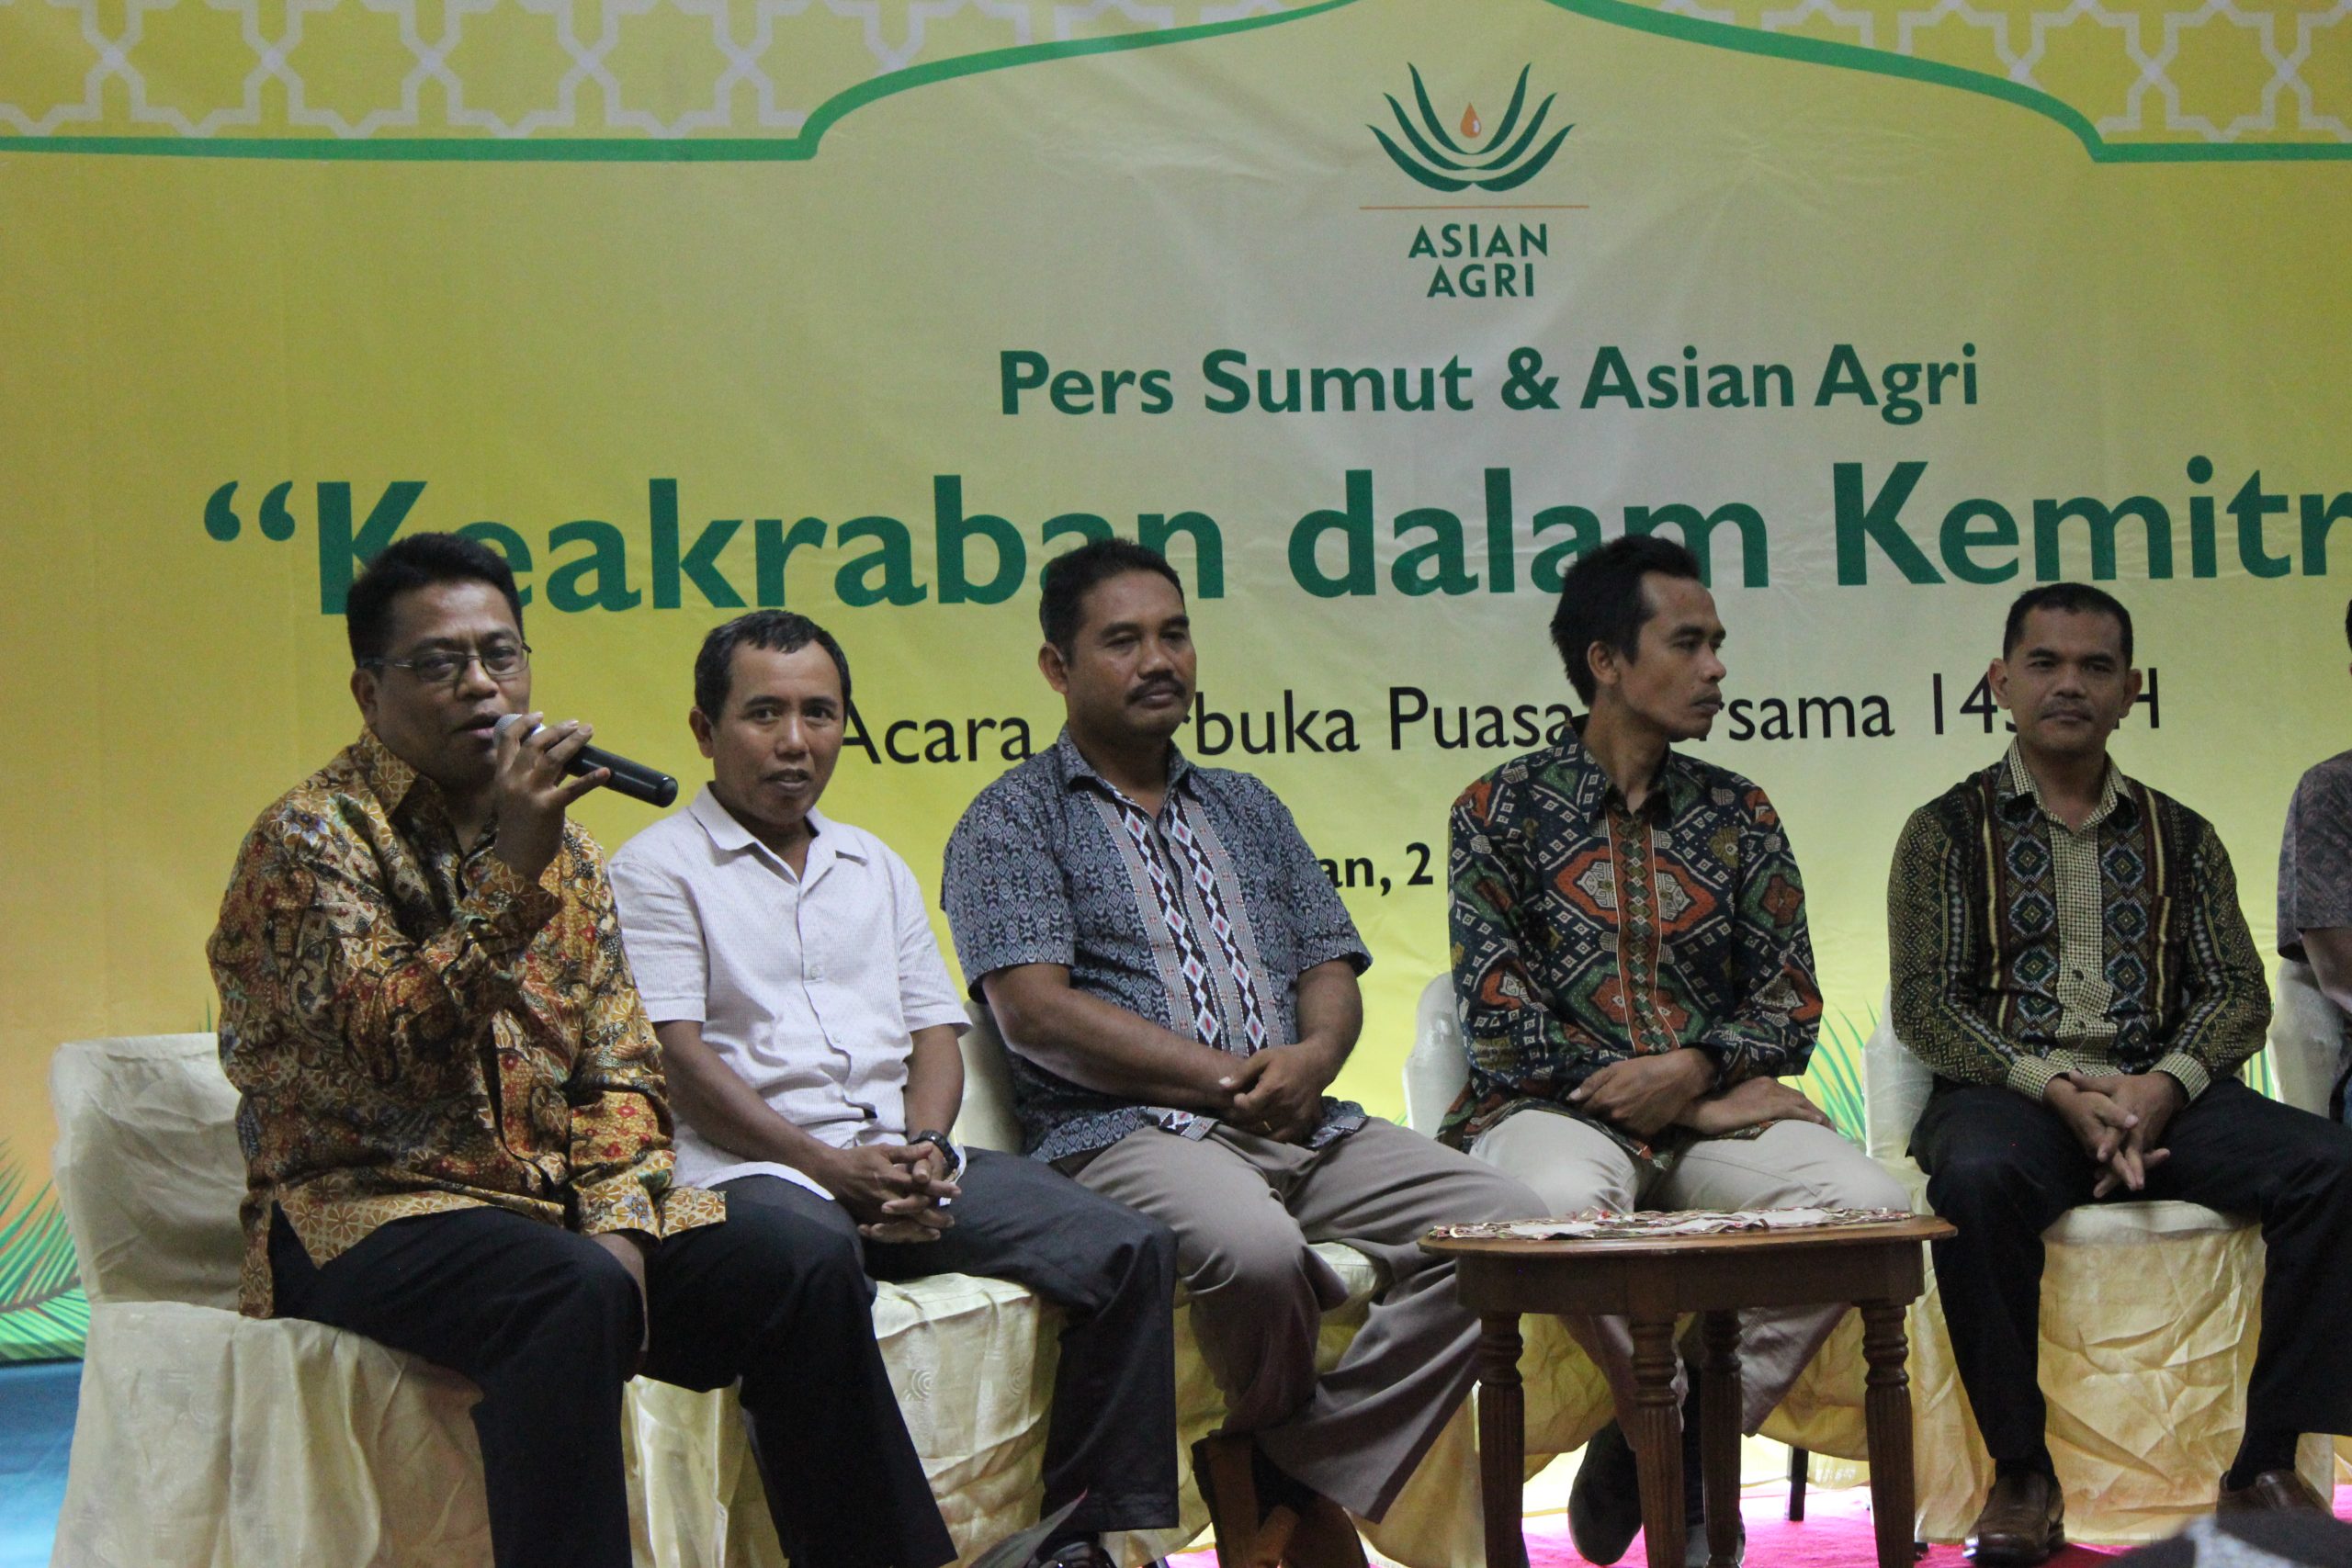 [Jurnal Asia] Asian Agri Continuesly Improving The Oil Palm Partnership